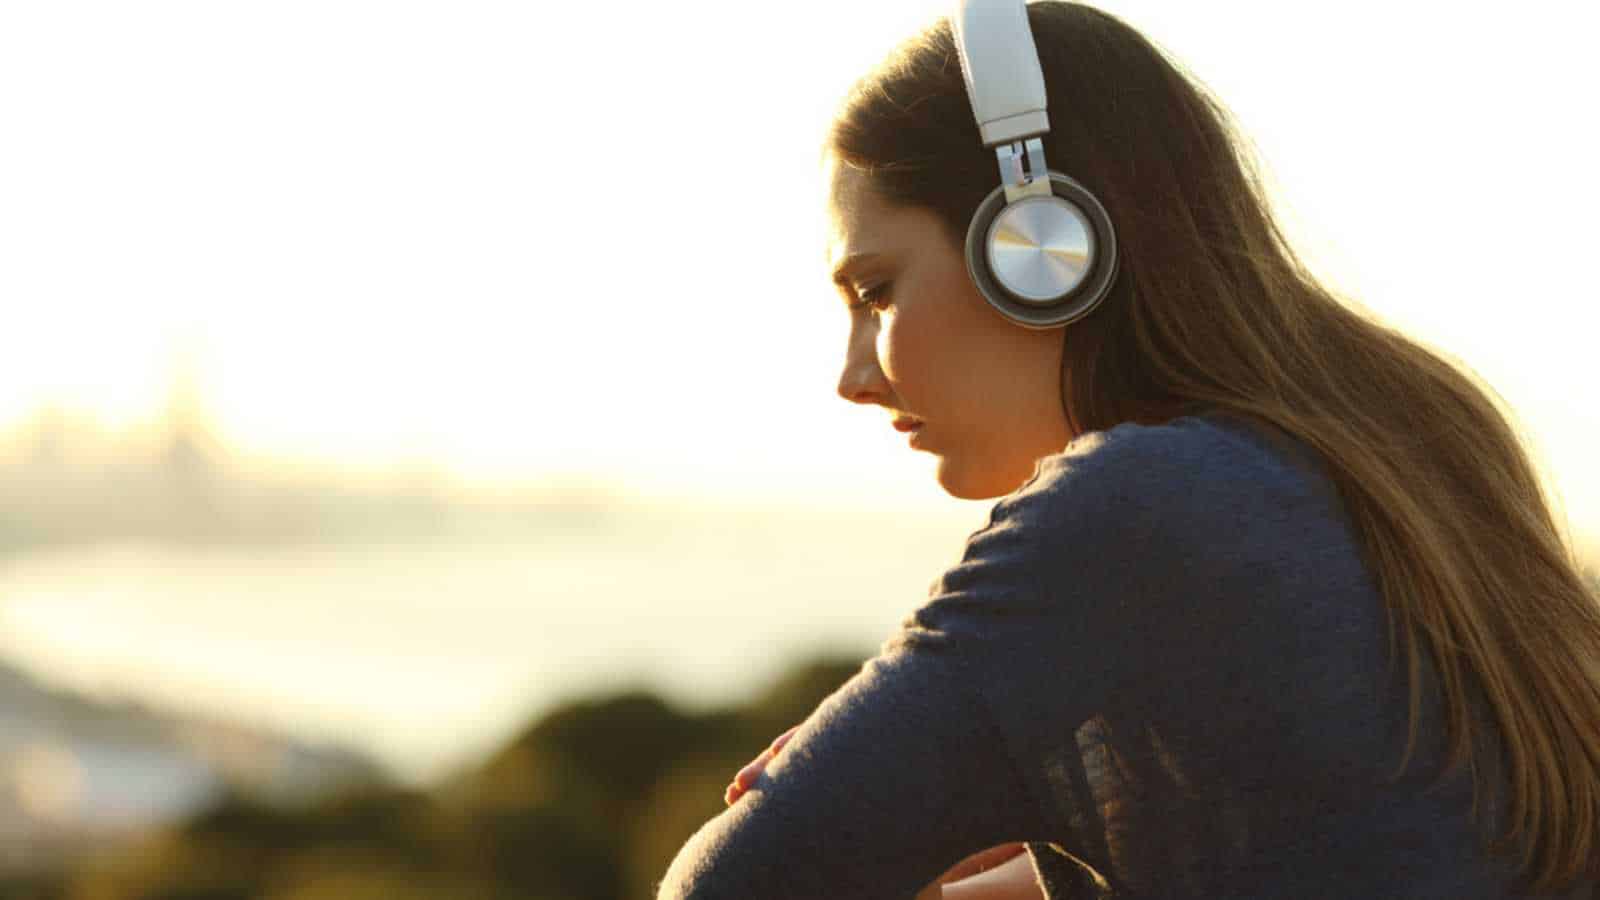 Introvert woman listening to music